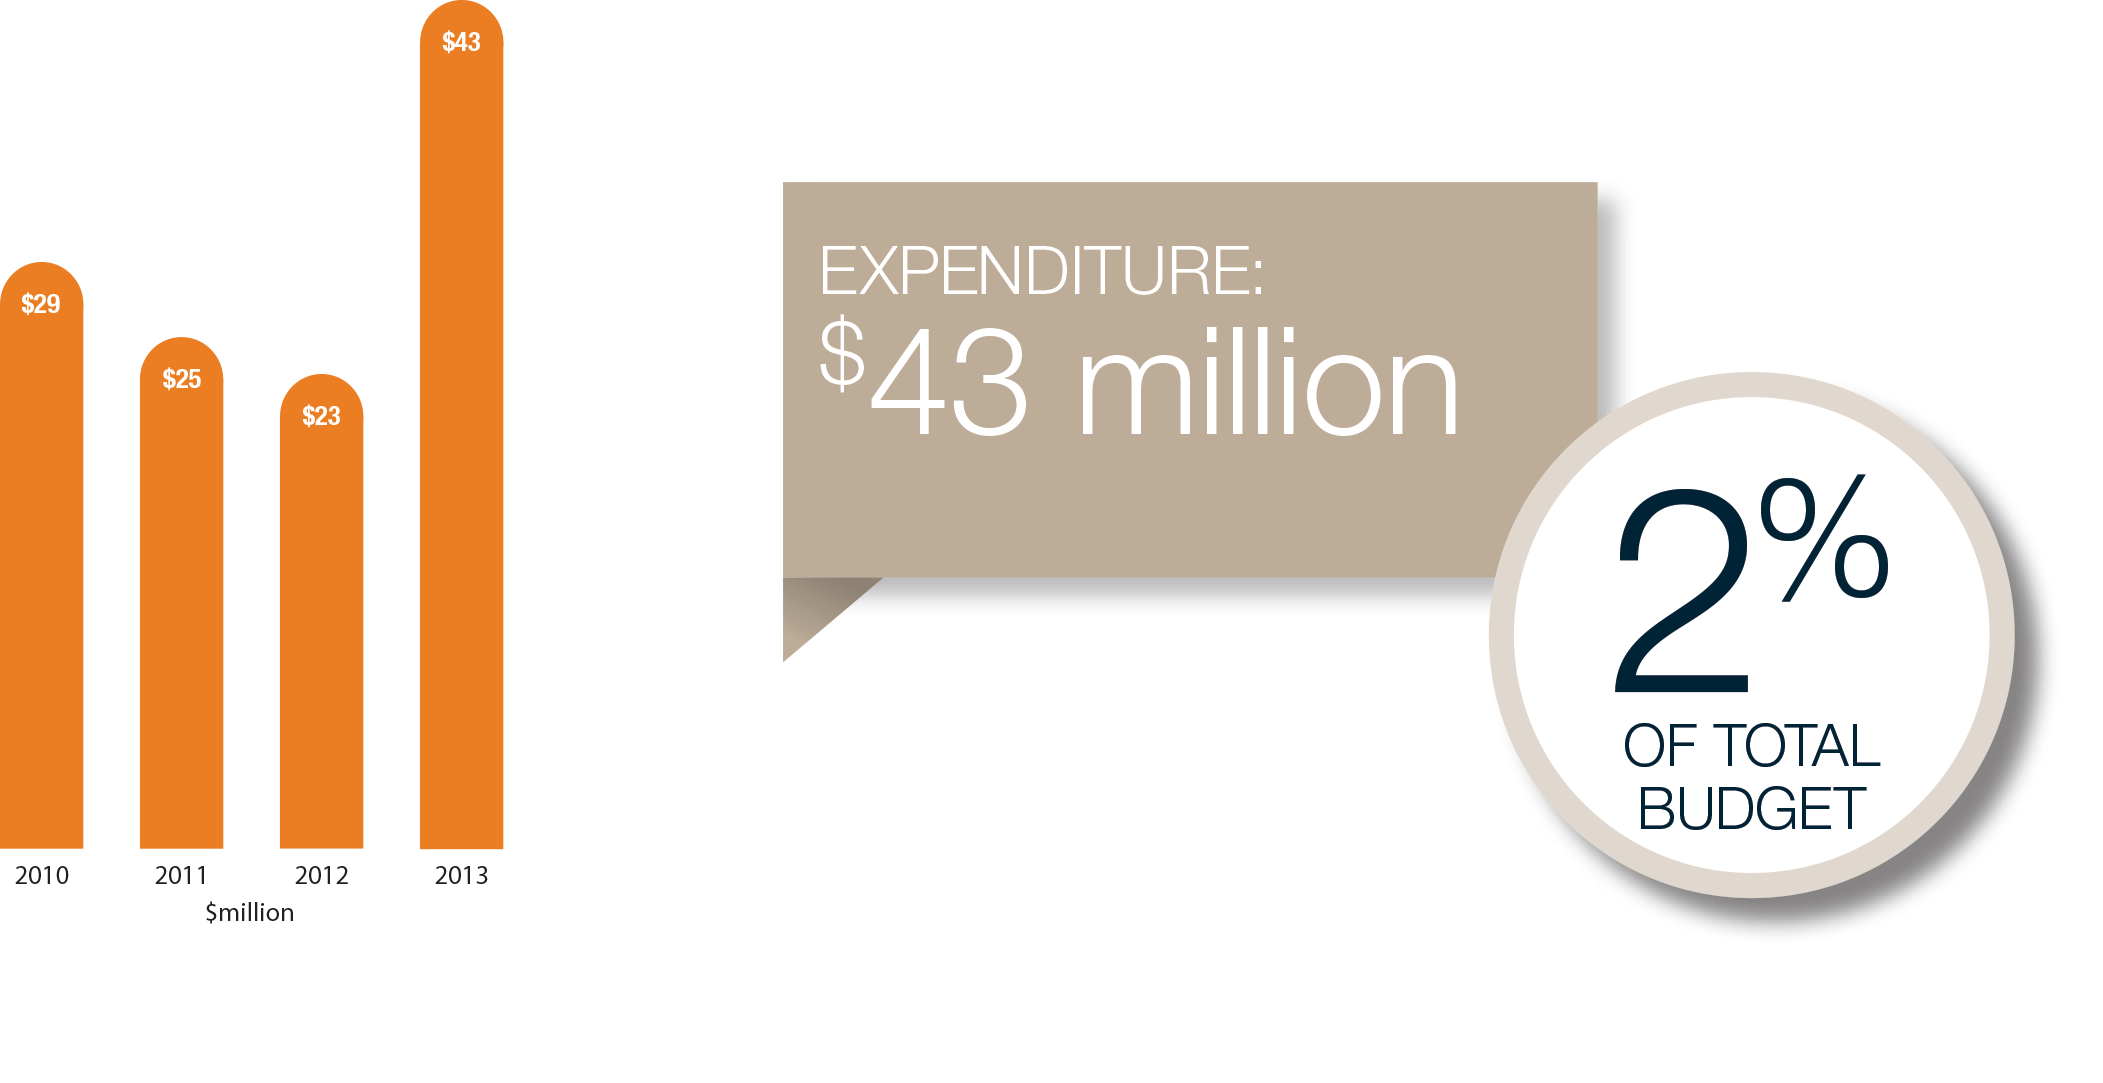 Expenditure in 2013 was $43 million or 2% of the total budget